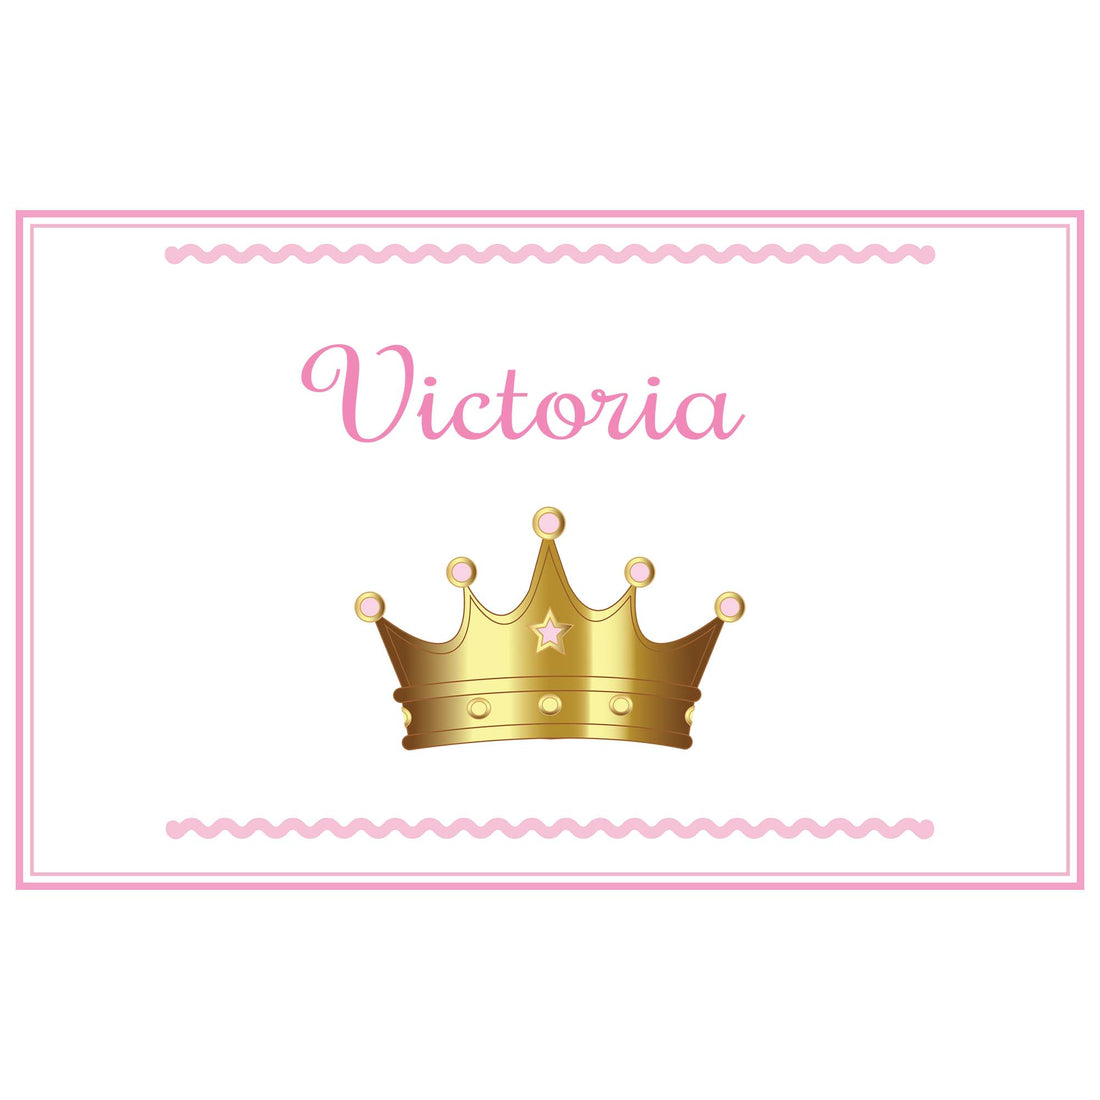 Personalized Placemat with Pink Princess Crown design